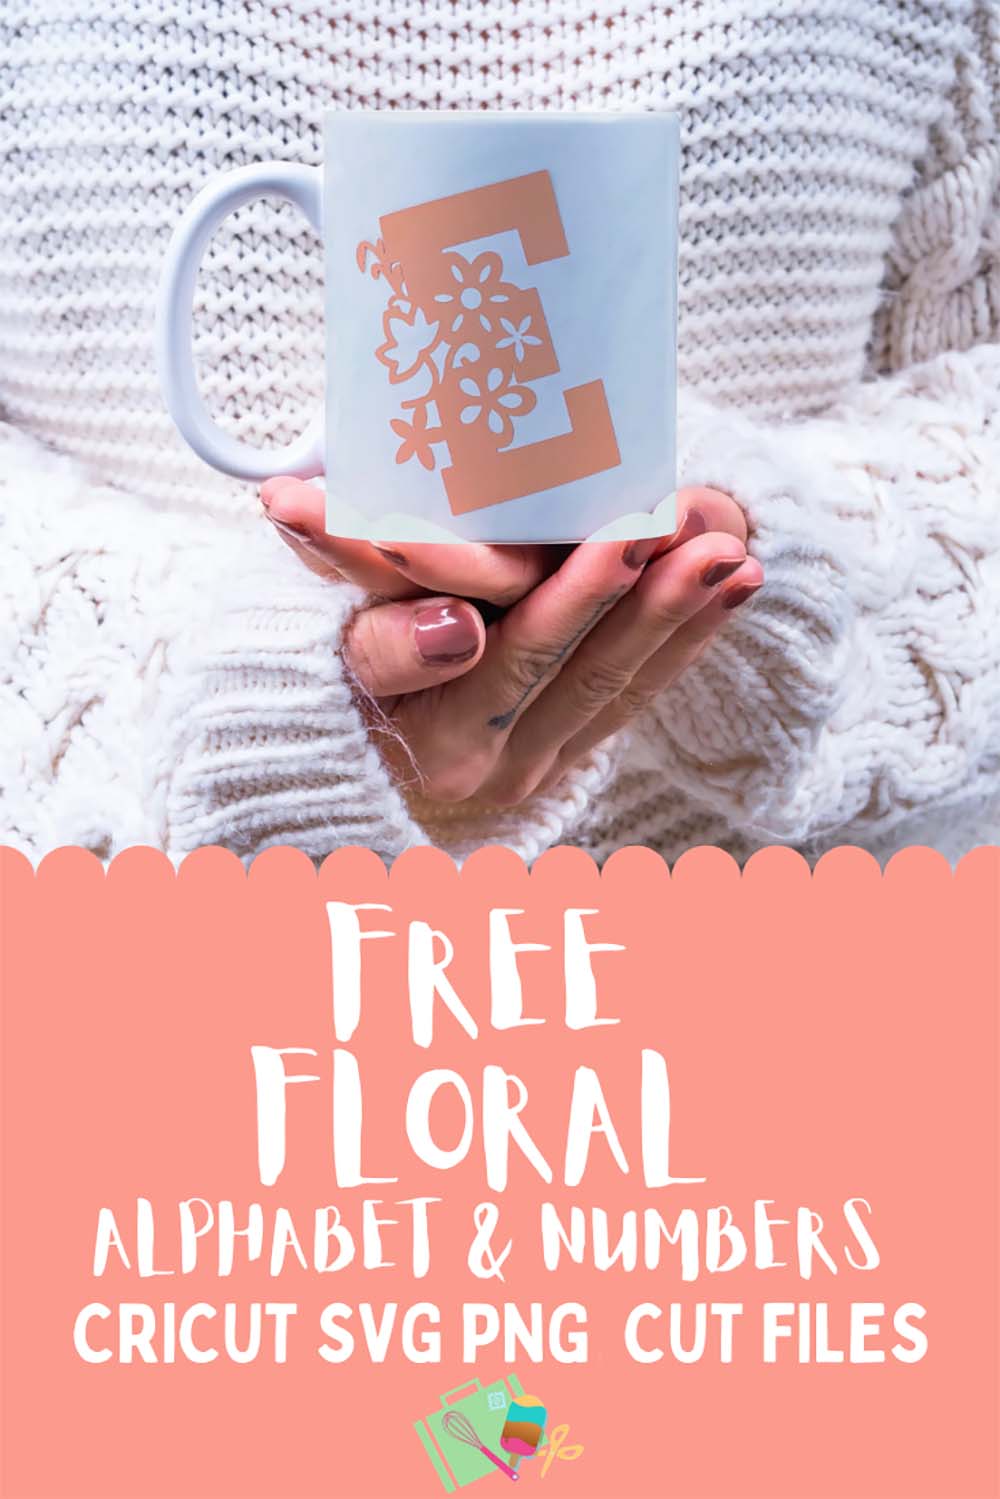 Free floral alphabet SVG PNG For Cricut Crafting and Scrapbooking